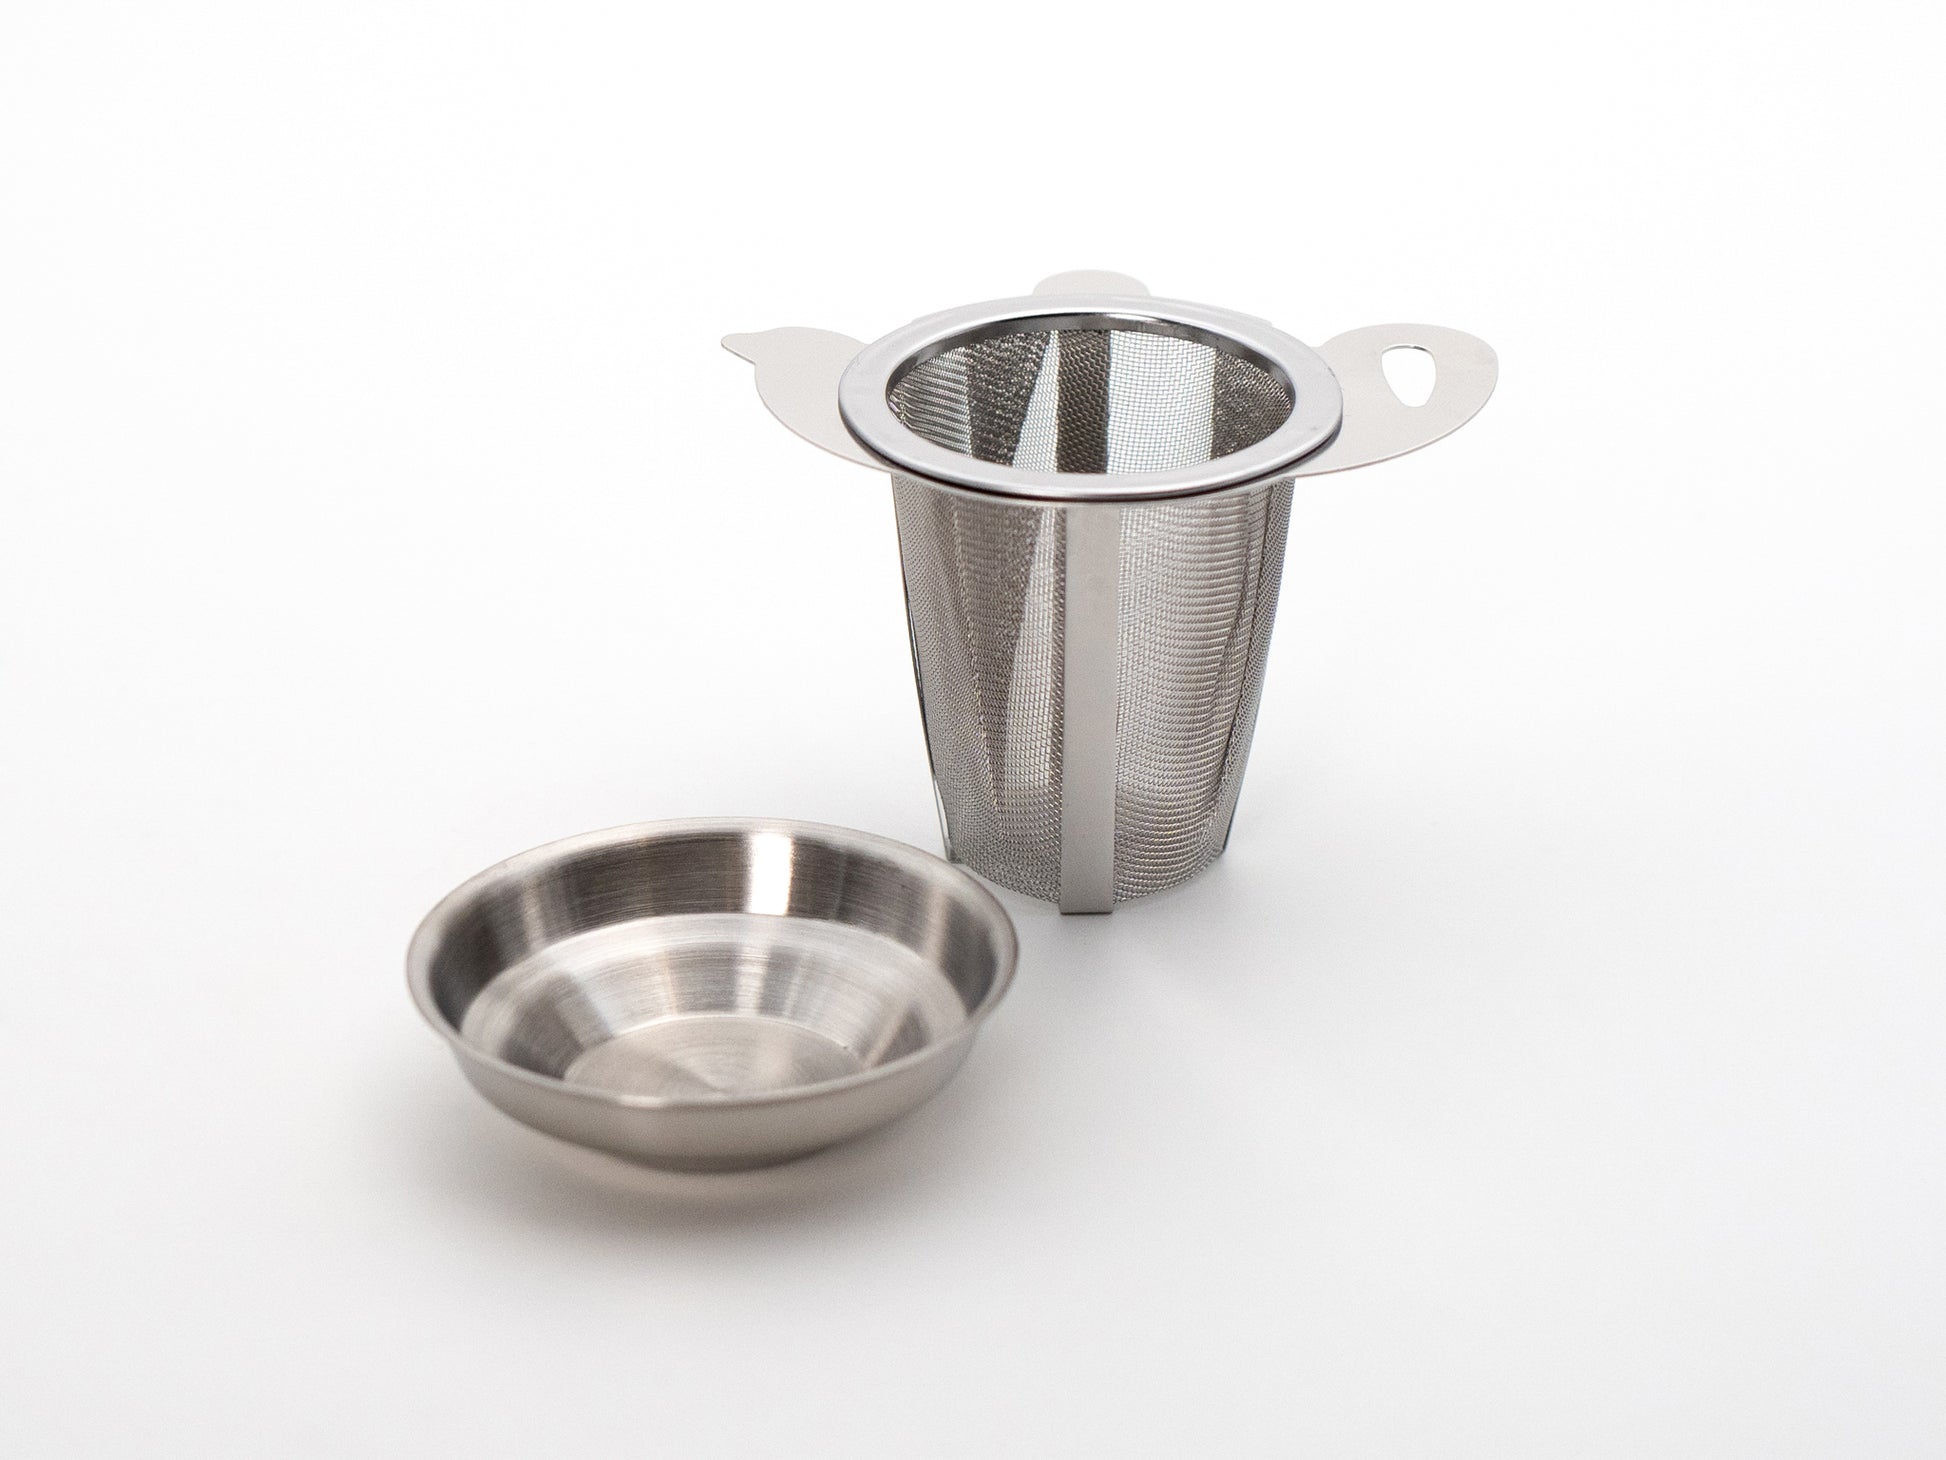 Tea pot shaped stainless steel tea infuser basket next to its stainless steel drip tray